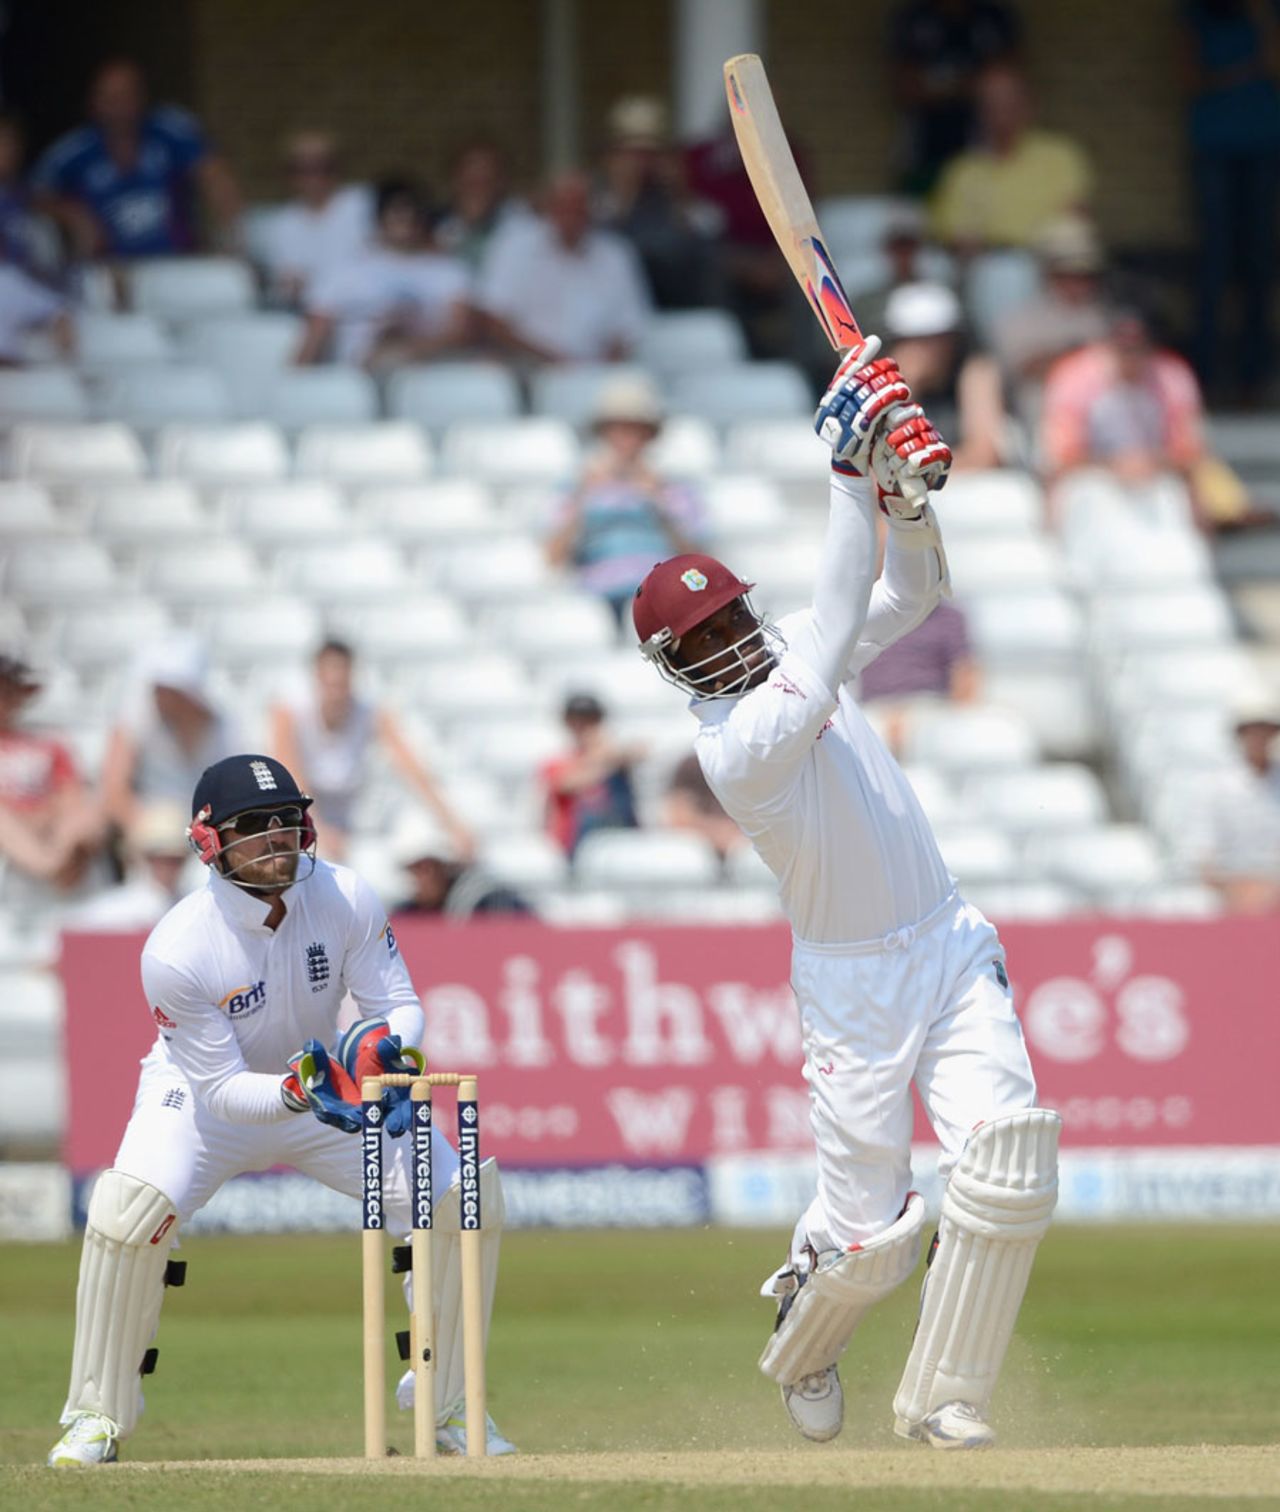 Marlon Samuels hit a couple of sixes off Graeme Swann to end on 76 not out, England v West Indies, 2nd Test, Trent Bridge, 4th day, May 28, 2012